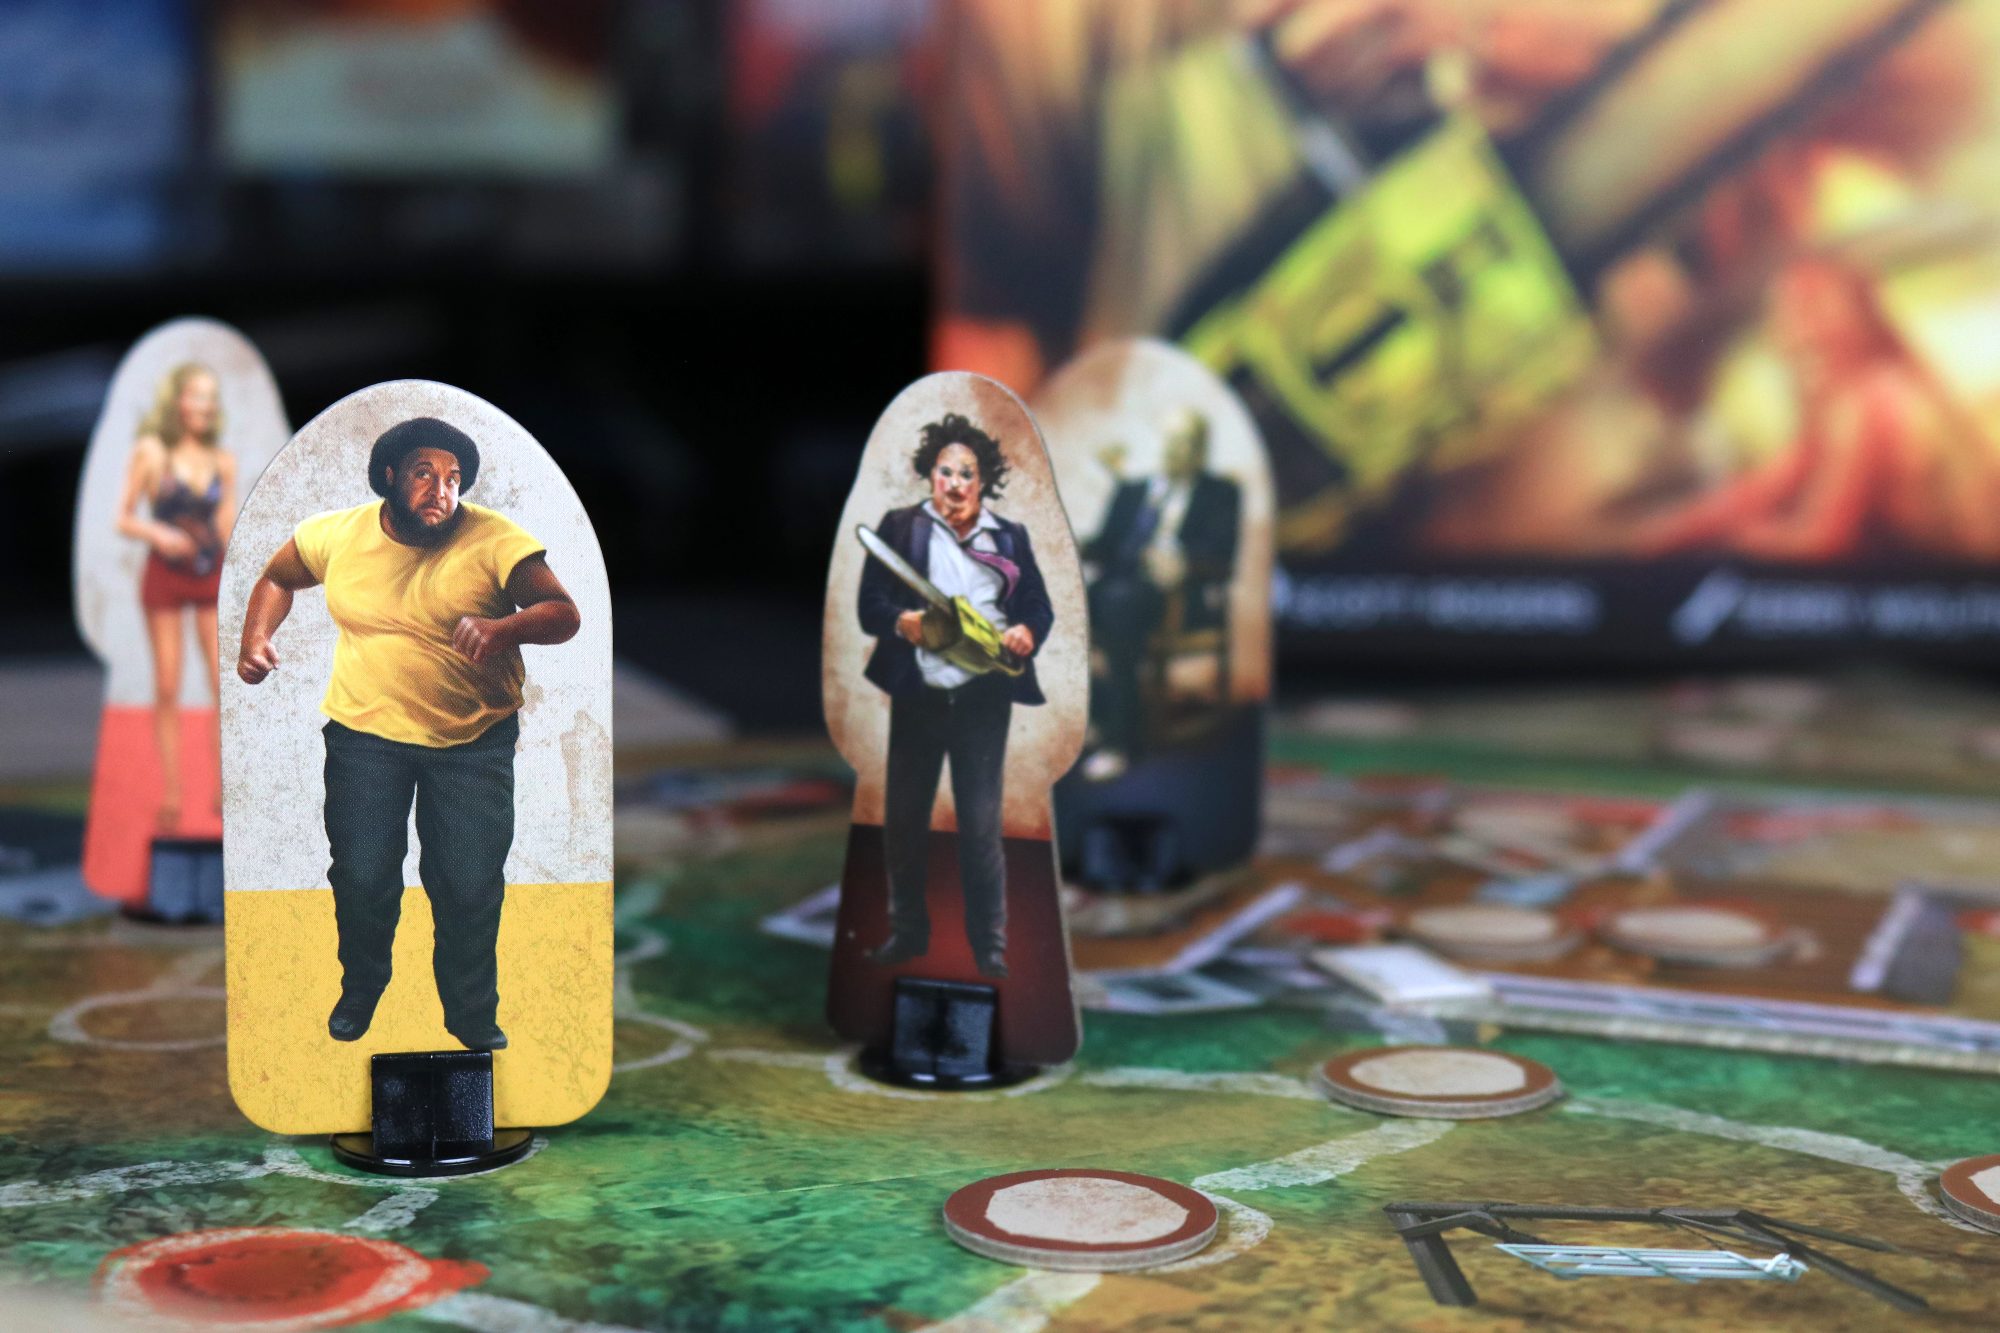 The Texas Chainsaw Massacre Board Game - Leatherface chase